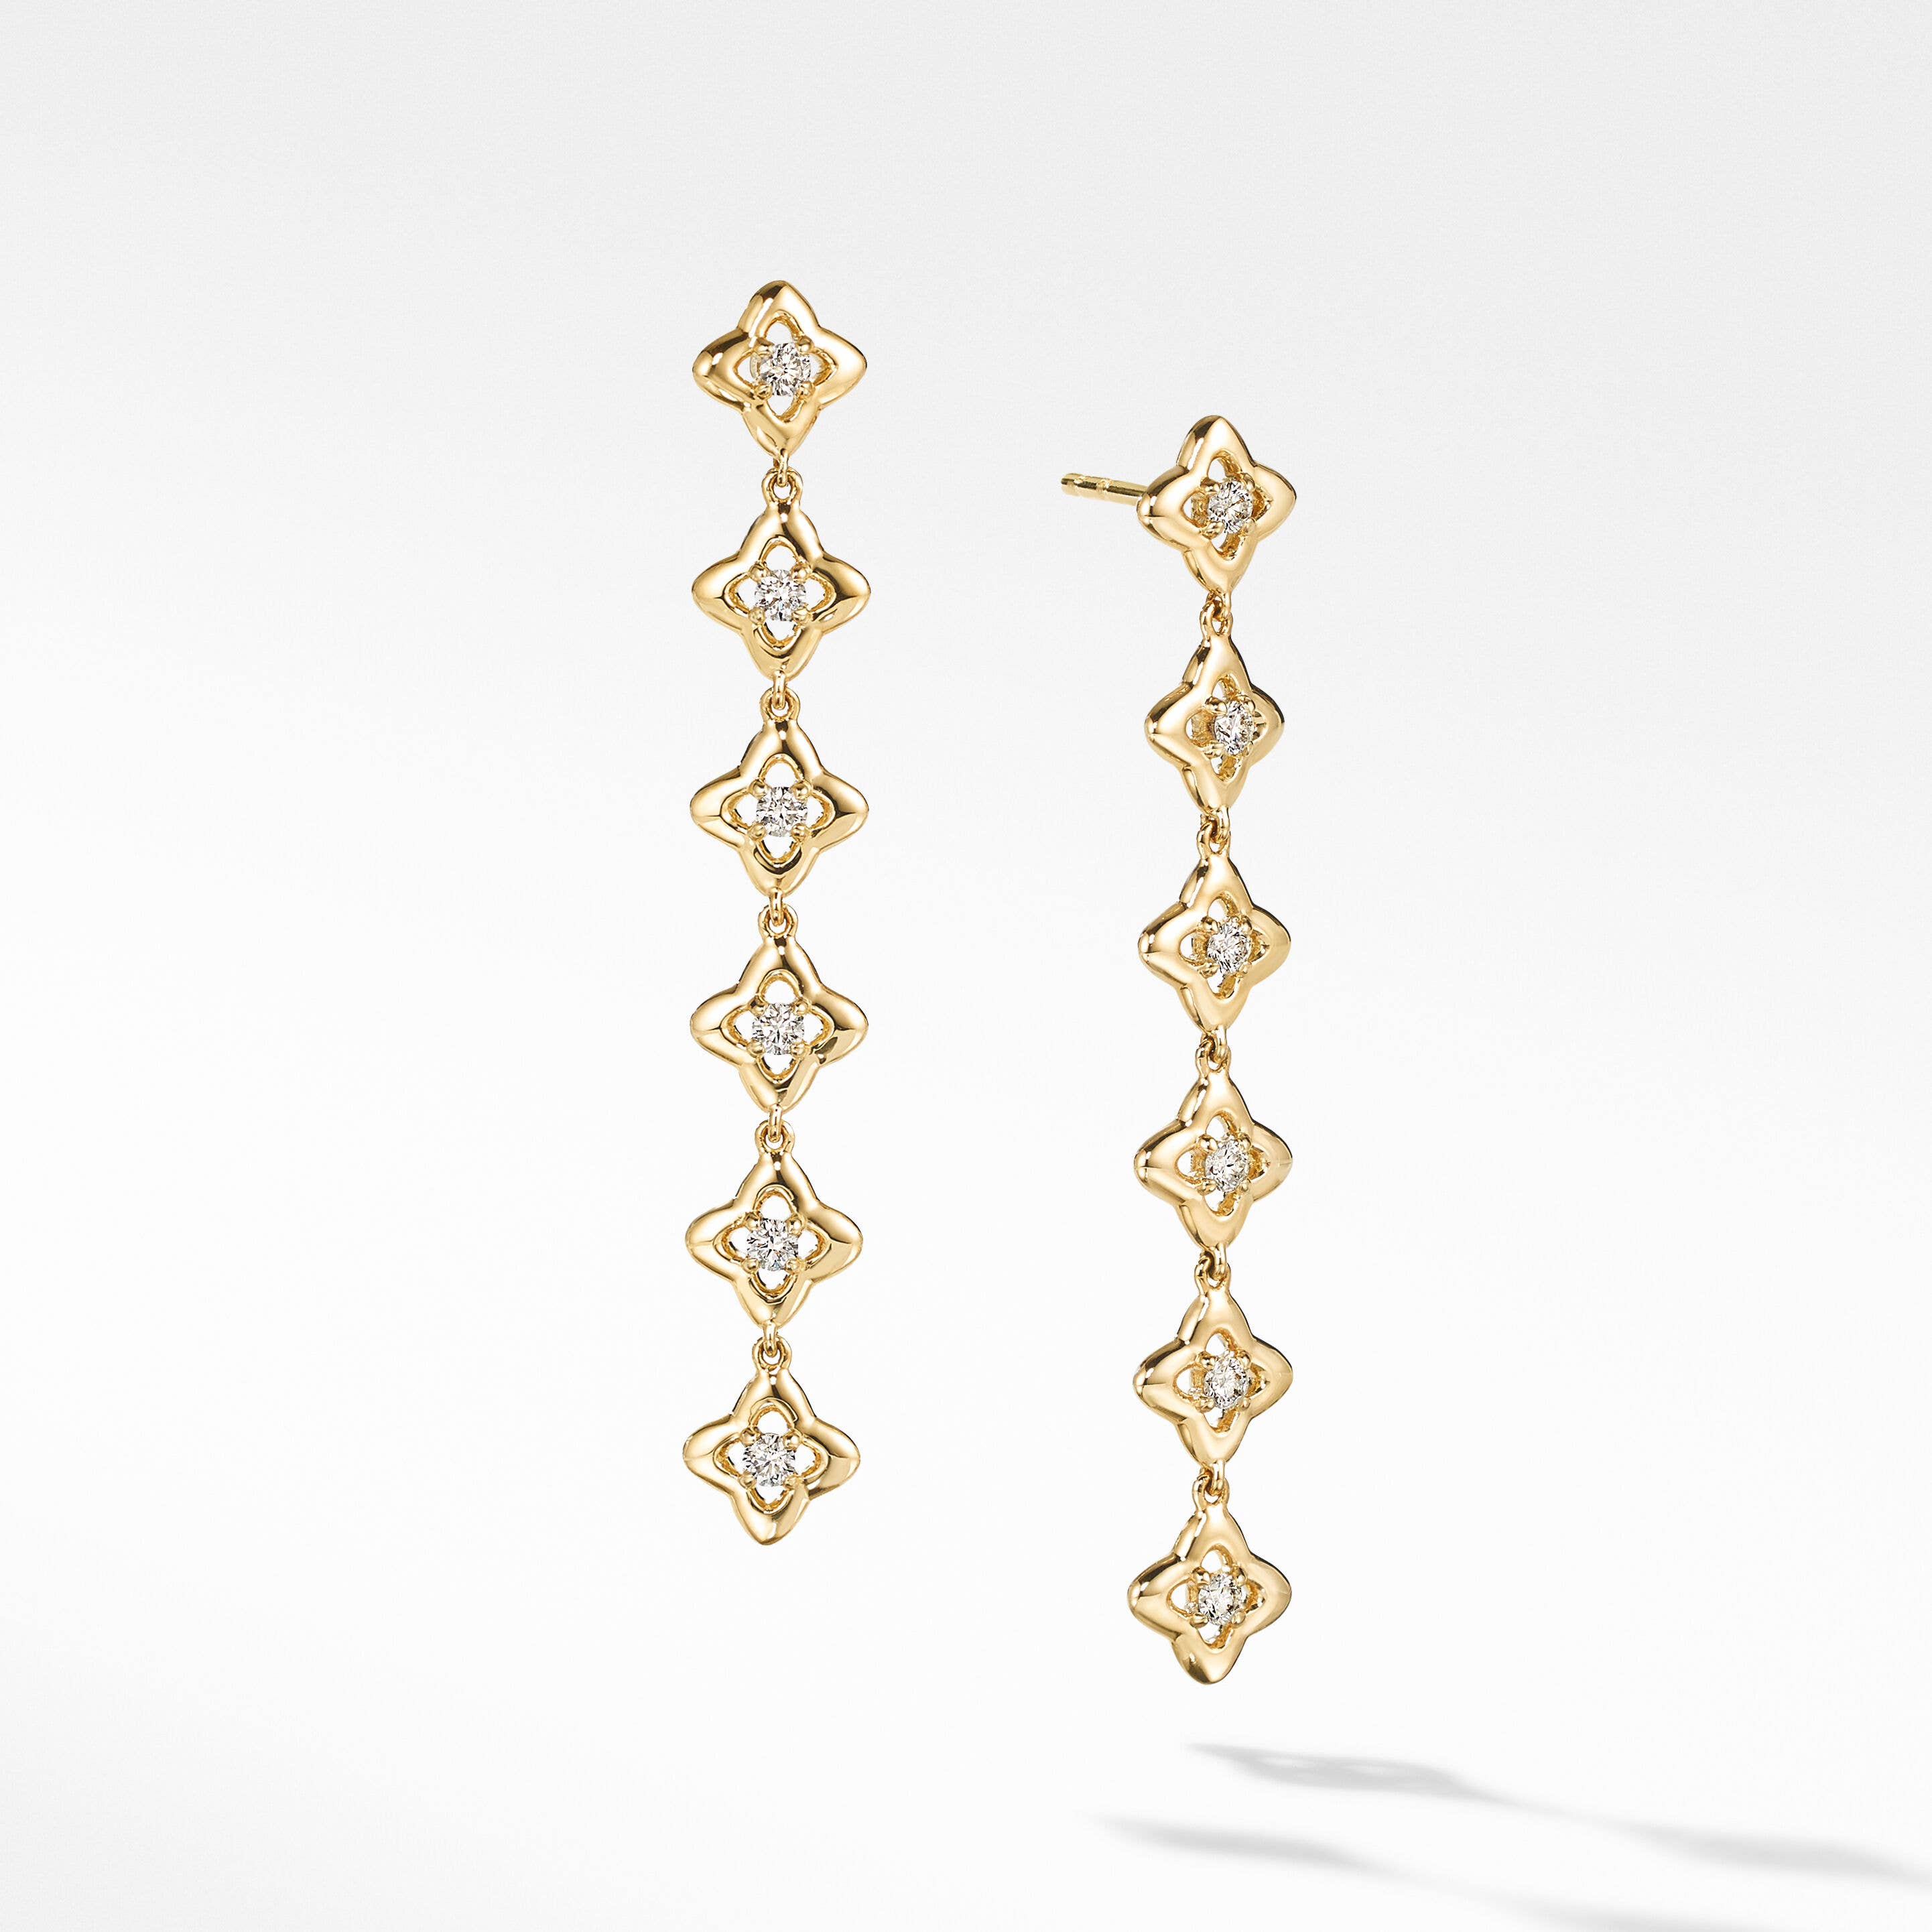 Cable Collectibles® Quatrefoil Drop Earrings in 18K Yellow Gold with Diamonds